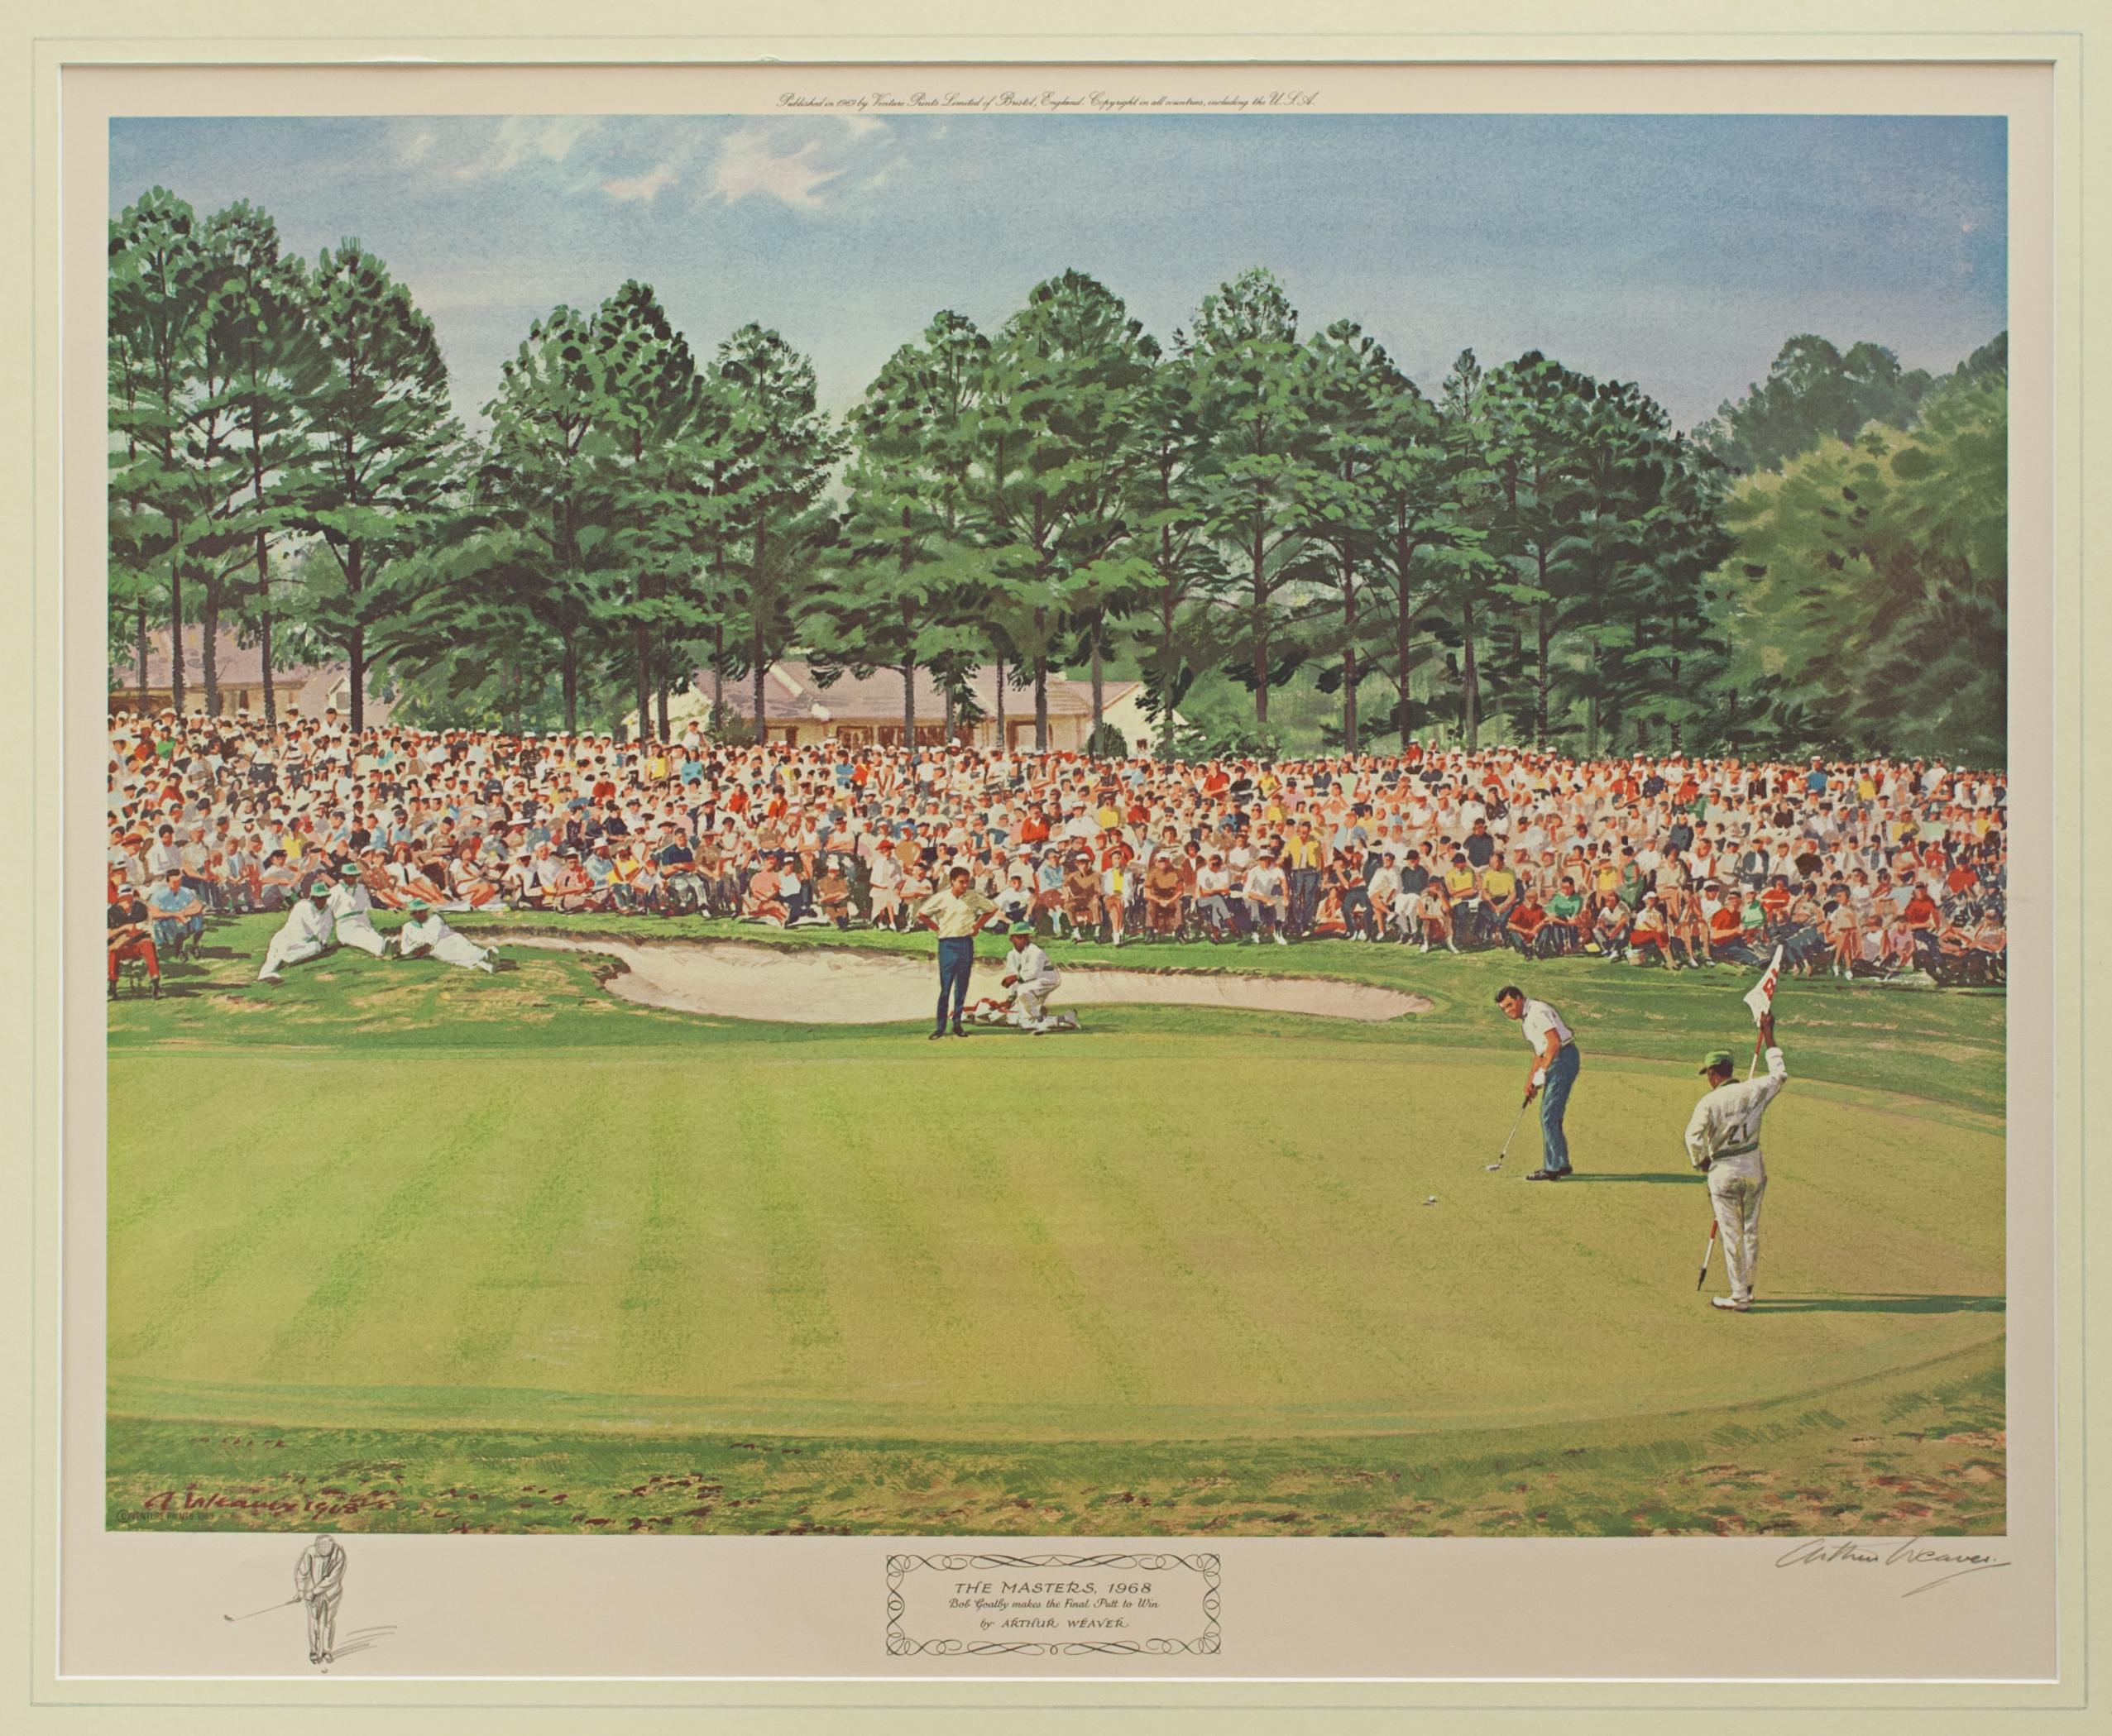 The 1968 US Masters Golf Tournament.
Arthur Weaver Golf print of The Masters 1968, Bob Goalby makes the final Putt to win. The print is signed in pencil by the artist with hand drawn remarque of a golfer chipping. Published in 1969 by Venture